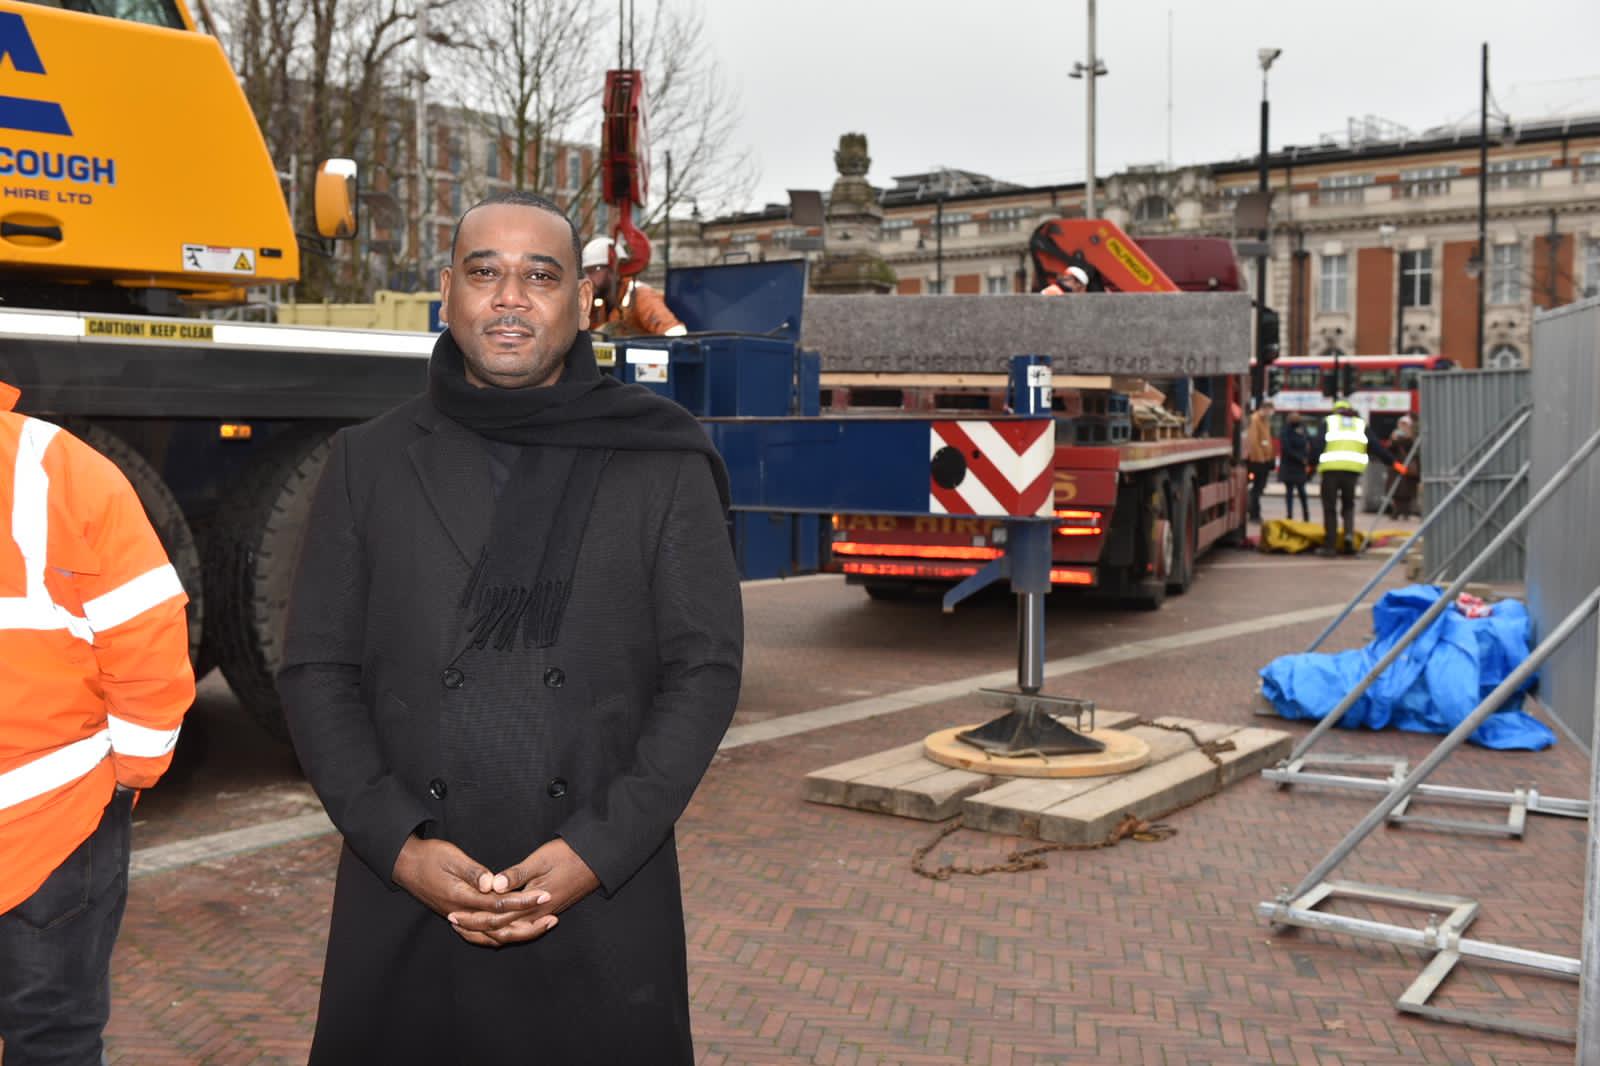 Brixton: Cherry Groce memorial arrives in Windrush Square for installation